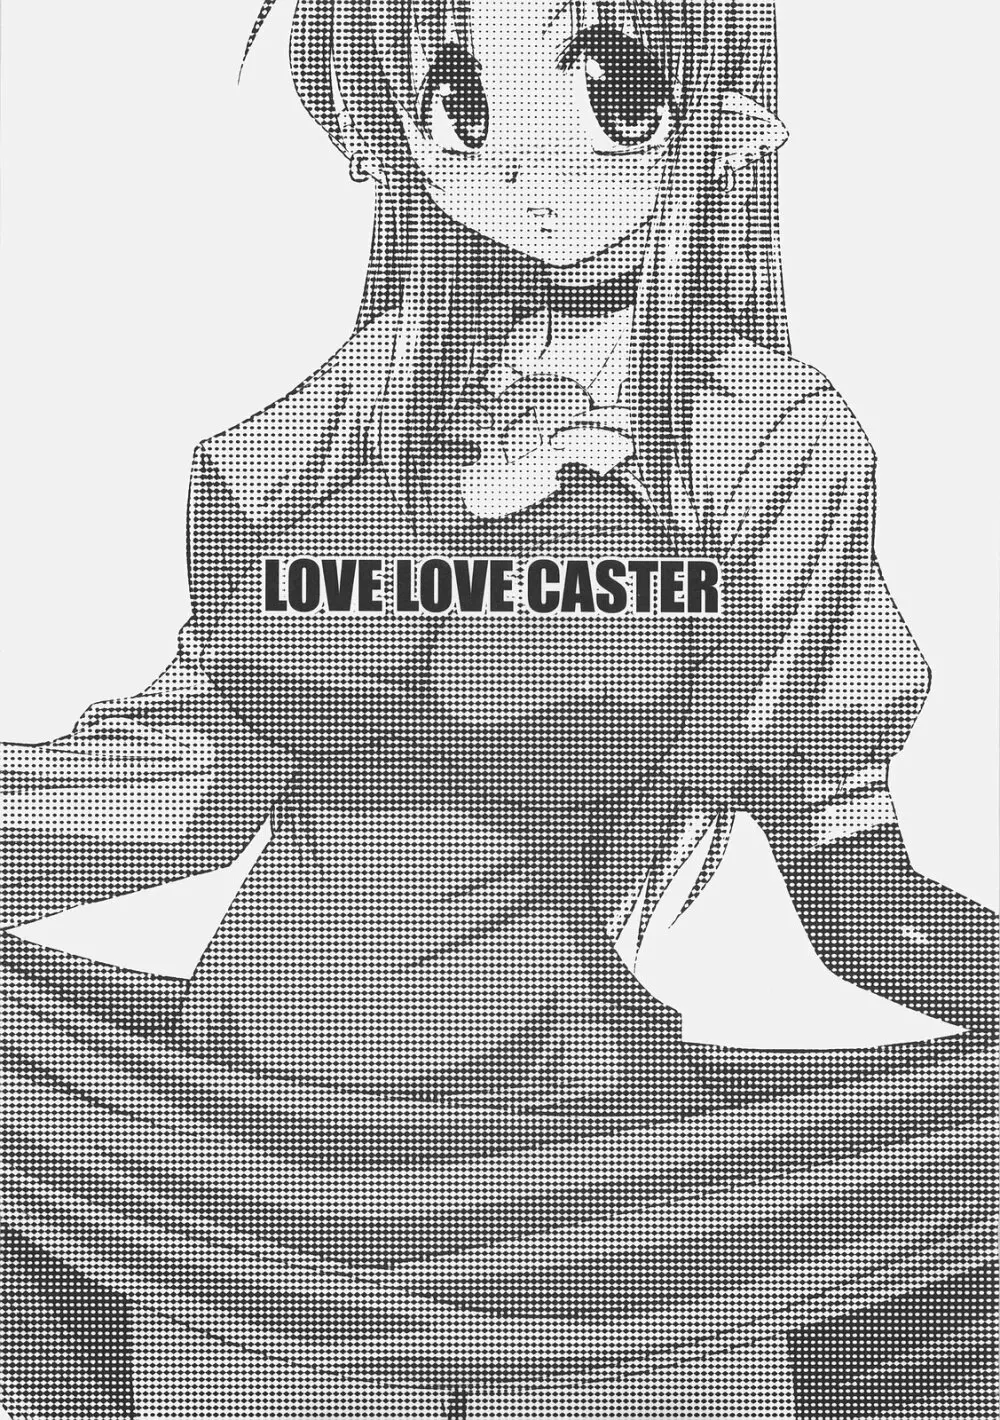 LOVE LOVE CASTER - page2